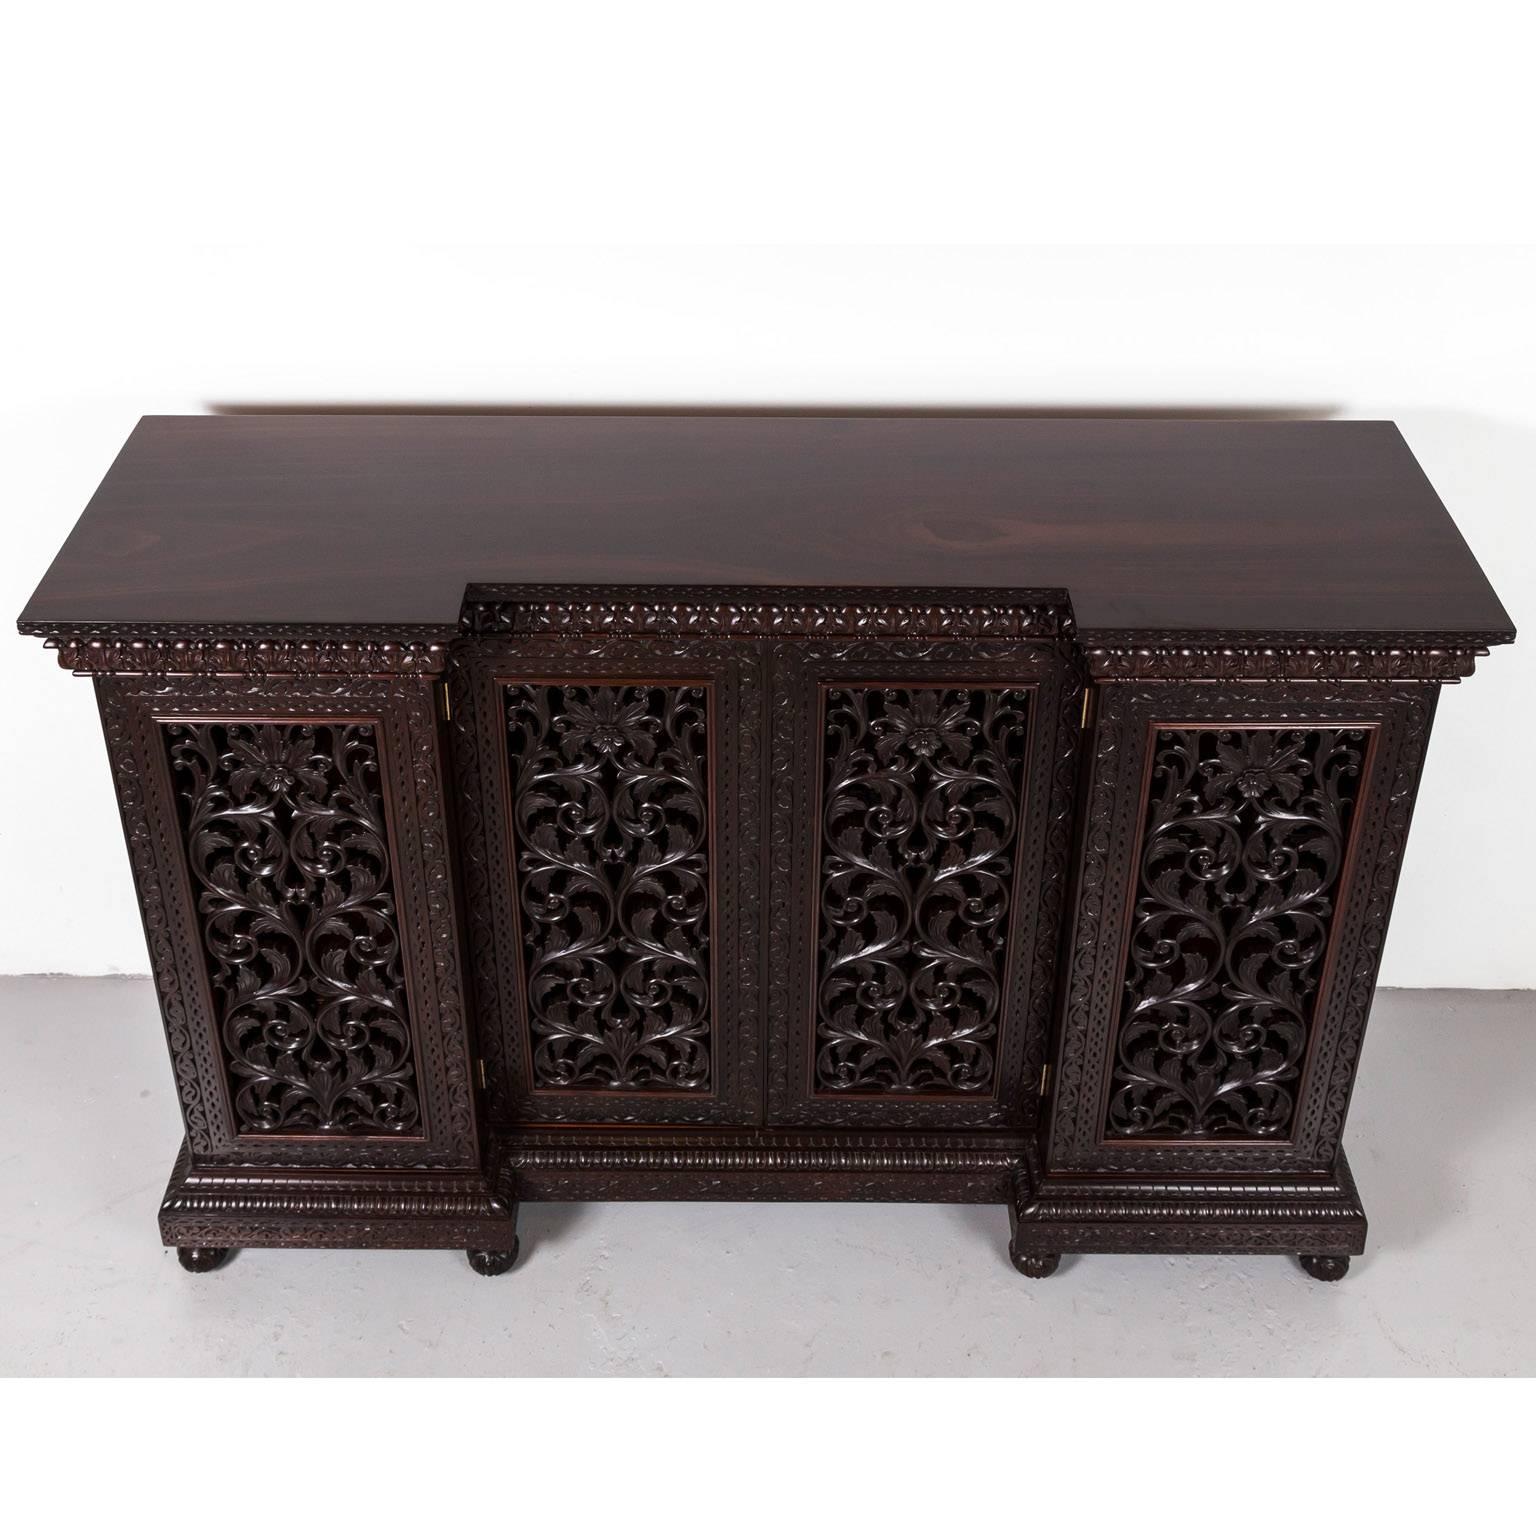 Carved Anglo-Indian or British Colonial Rosewood Breakfront Cabinet